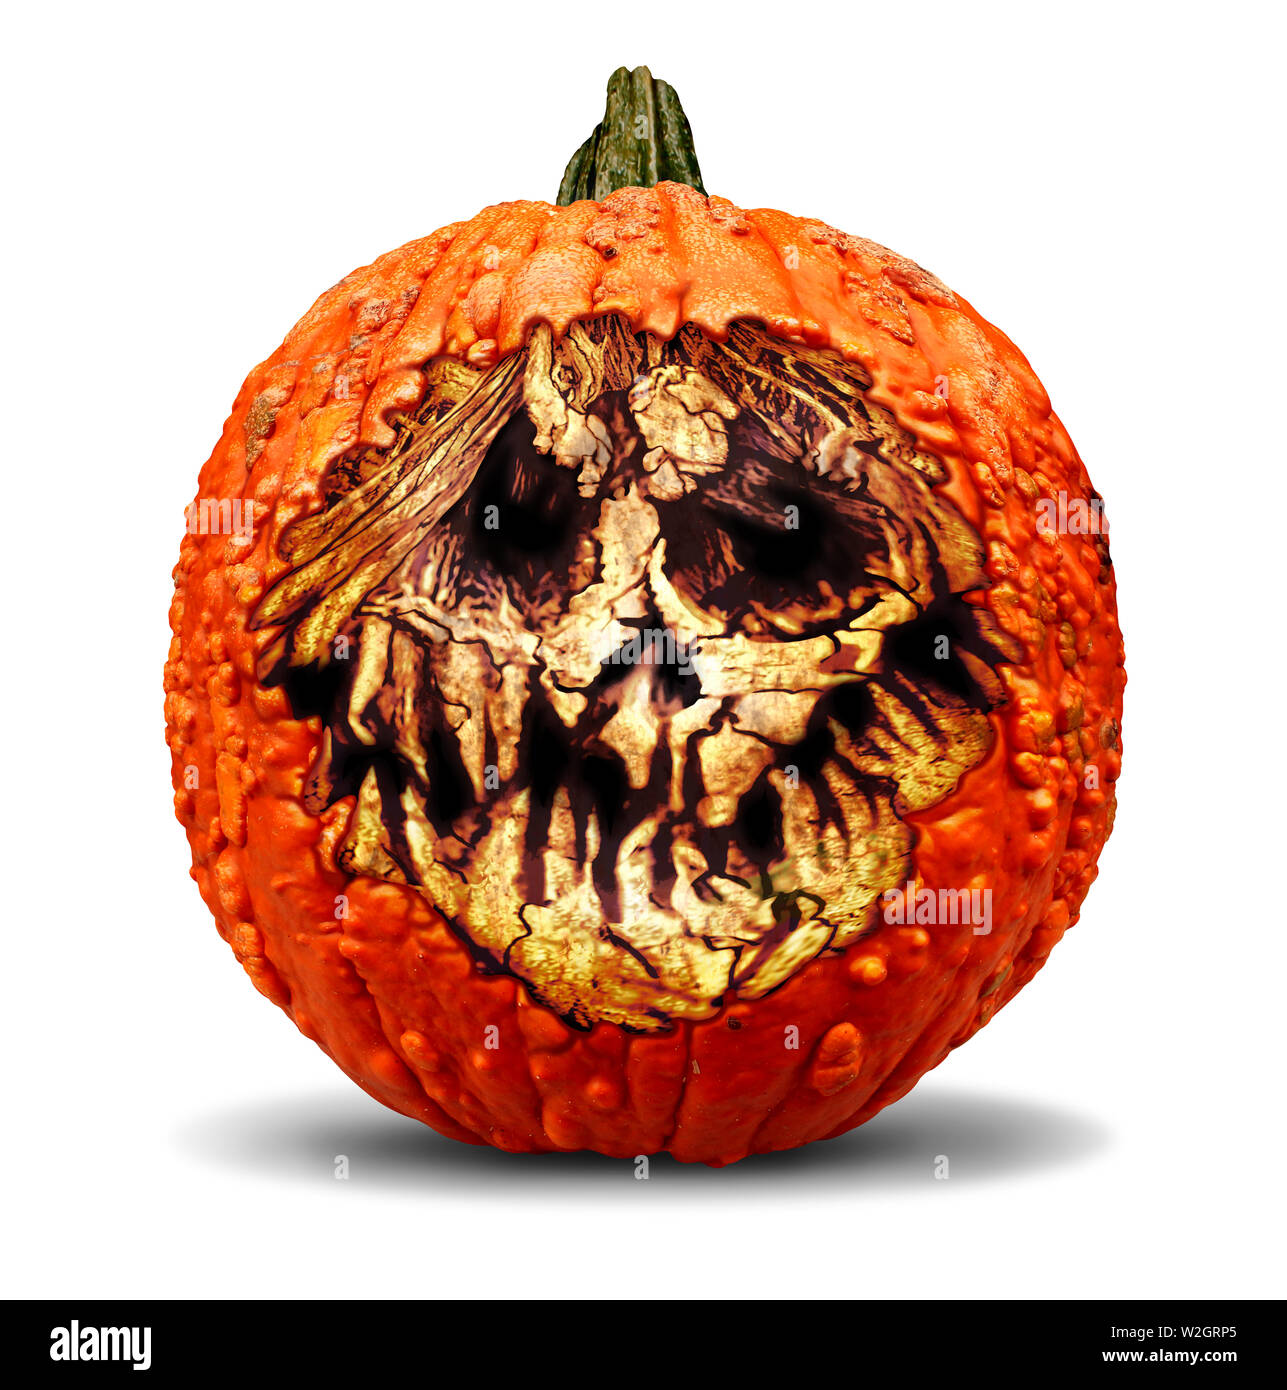 Creepy Halloween jack o lantern pumpkin with a carved evil scary expression  of death and horror in a 3D illustration style Stock Photo - Alamy